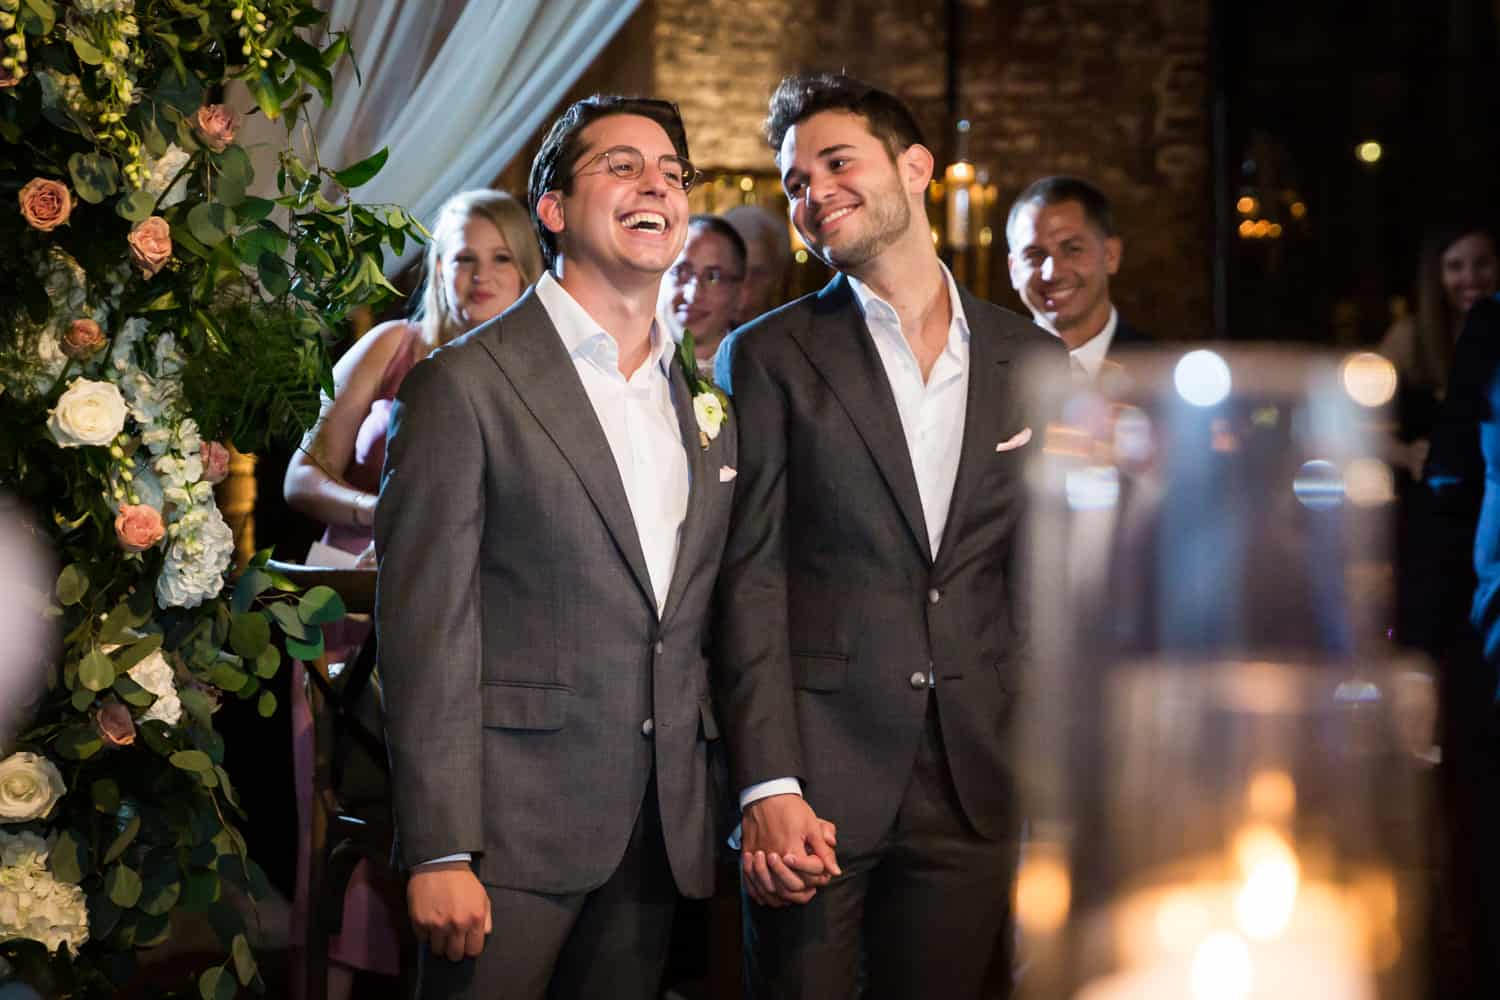 Greenpoint Loft wedding photos of two grooms listening to speeches